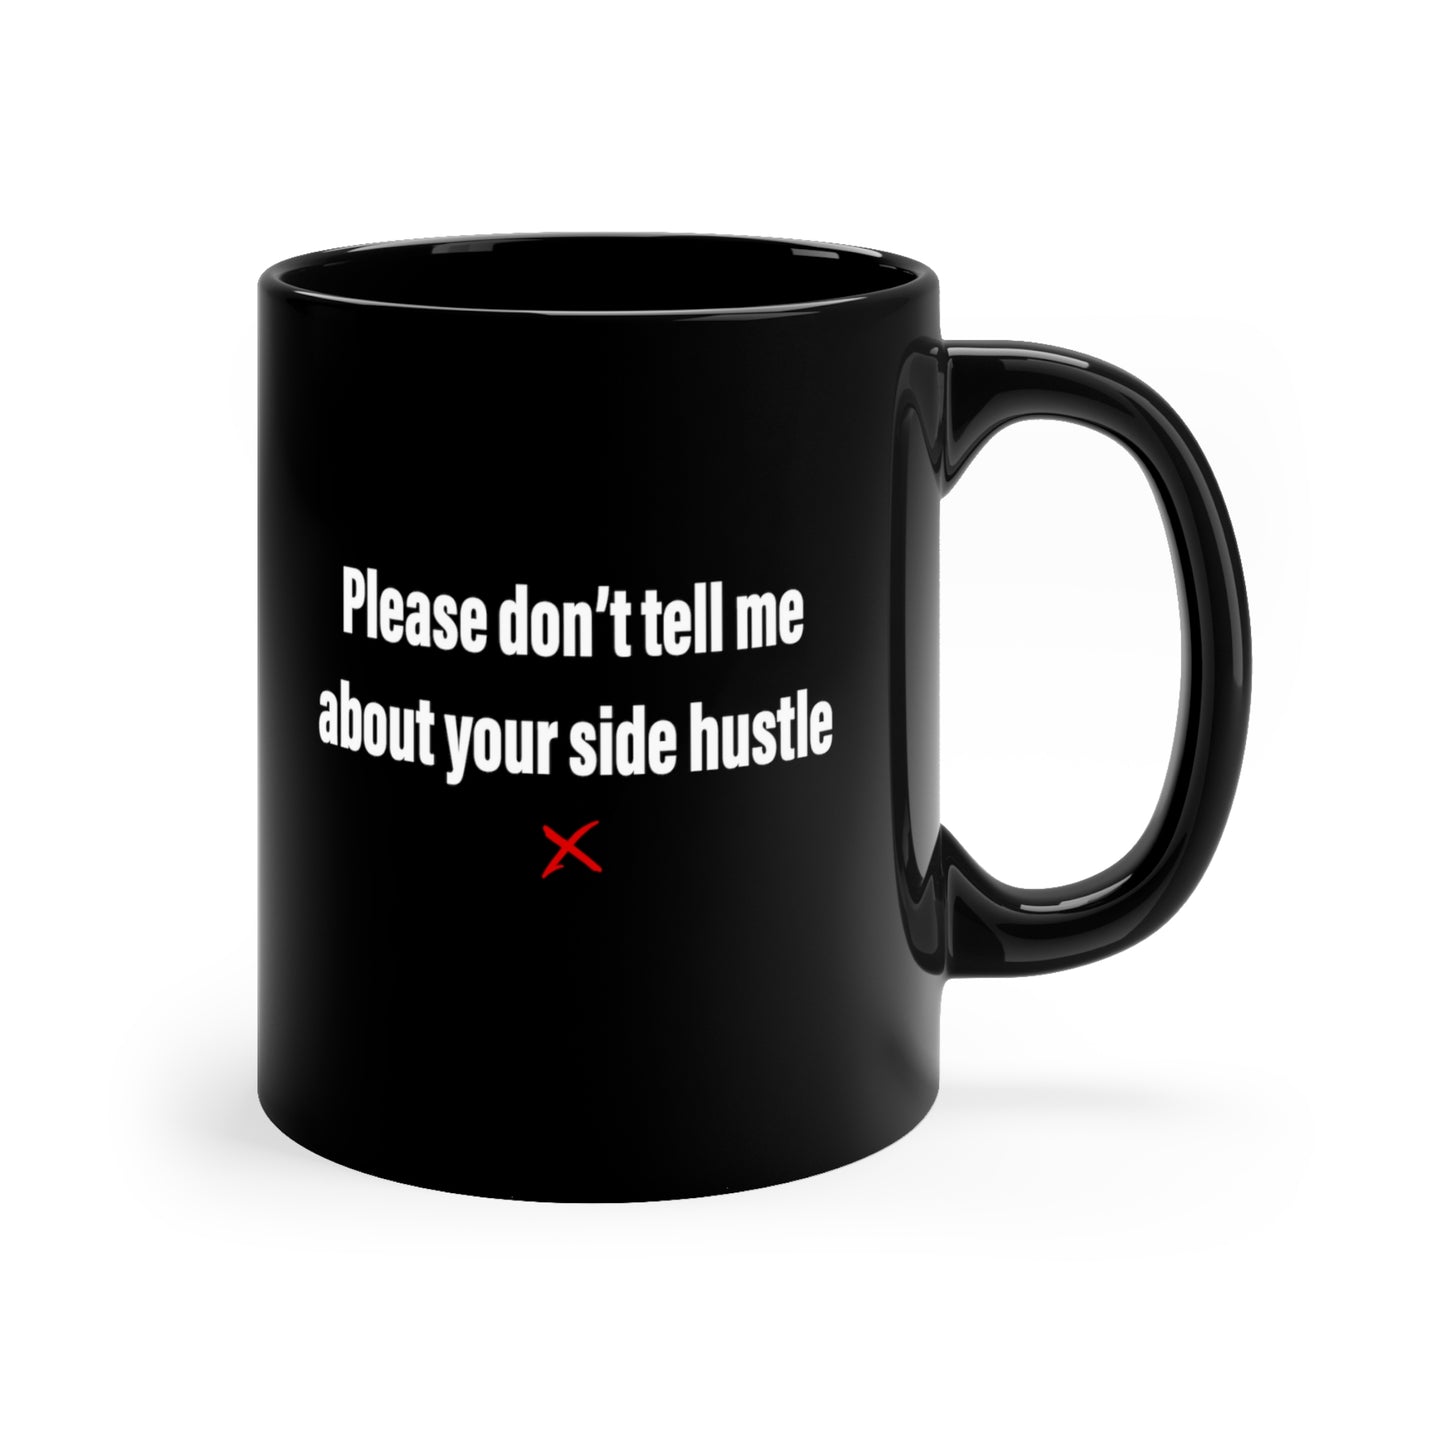 Please don't tell me about your side hustle - Mug